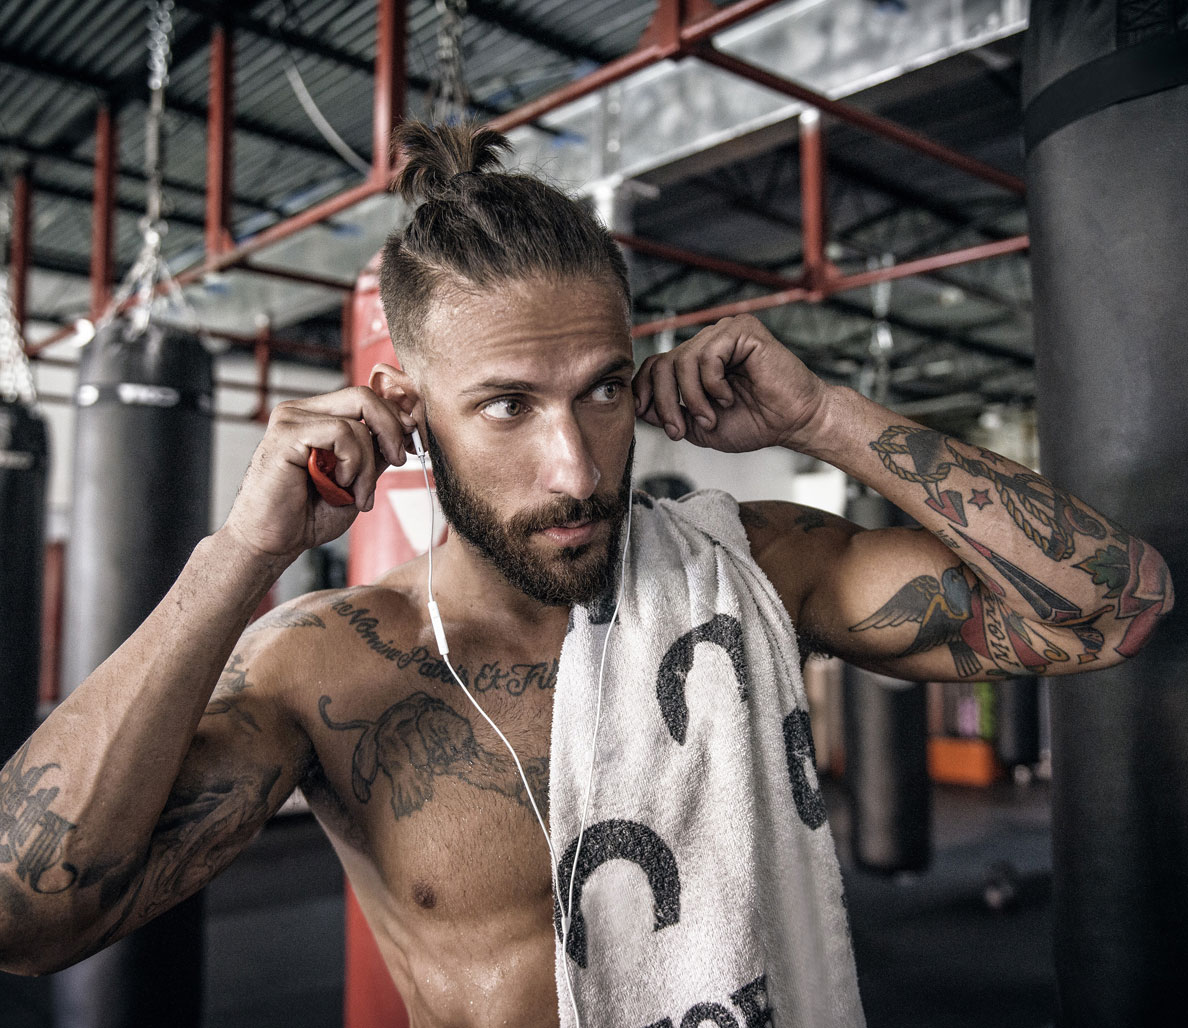 We Asked 100 Women: Are You Into Guys With Man Buns? | Muscle & Fitness